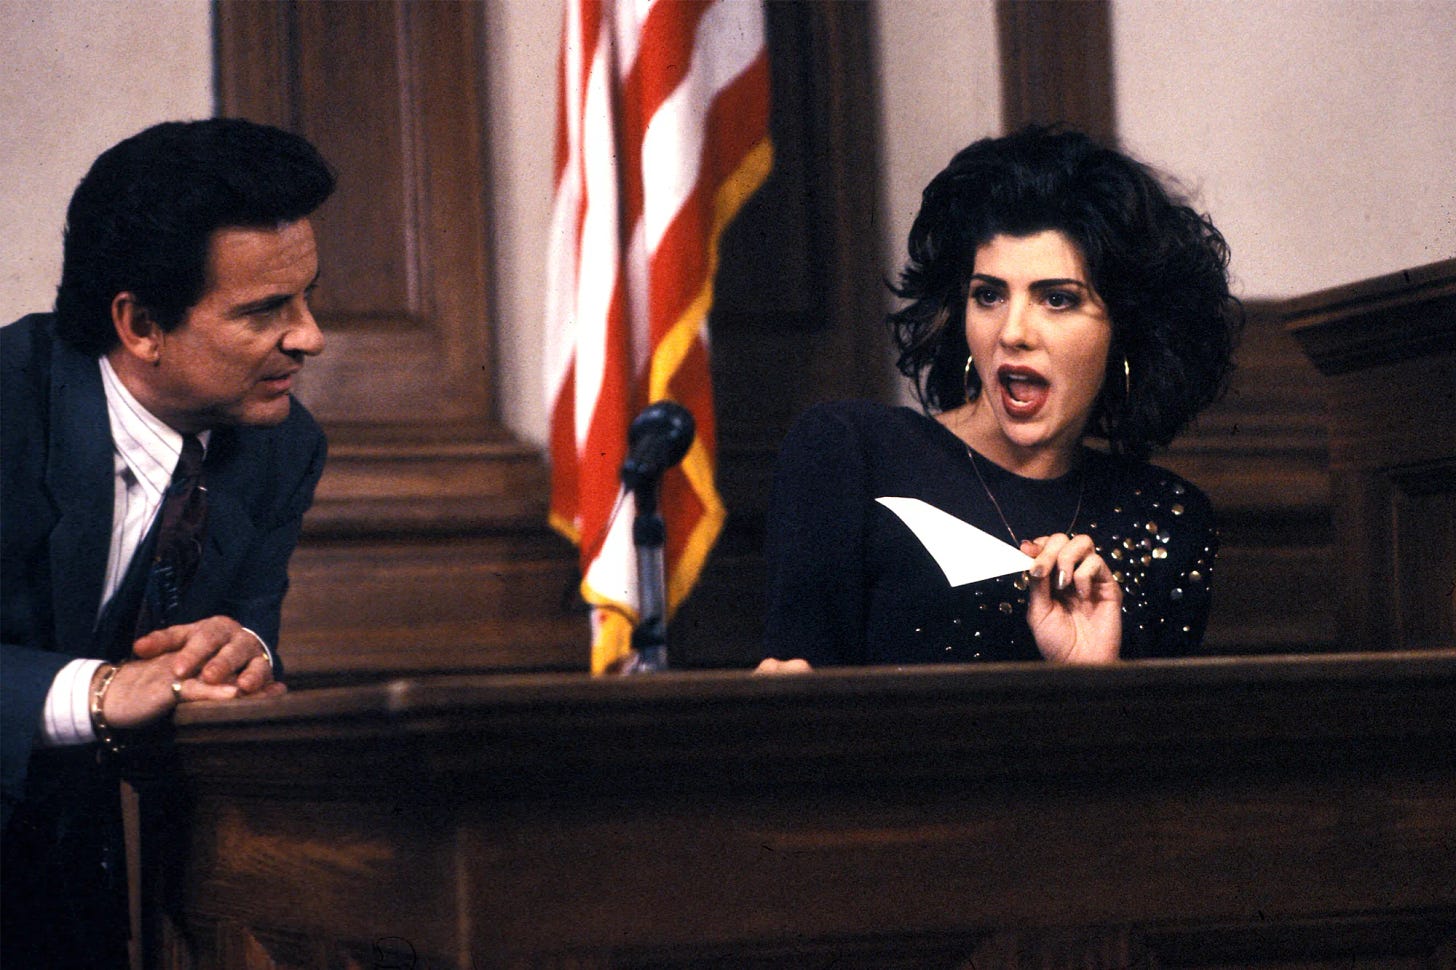 Marisa Tomei as Mona Lisa on the stand gesturing wildly as Joe Pesci looks on from the left